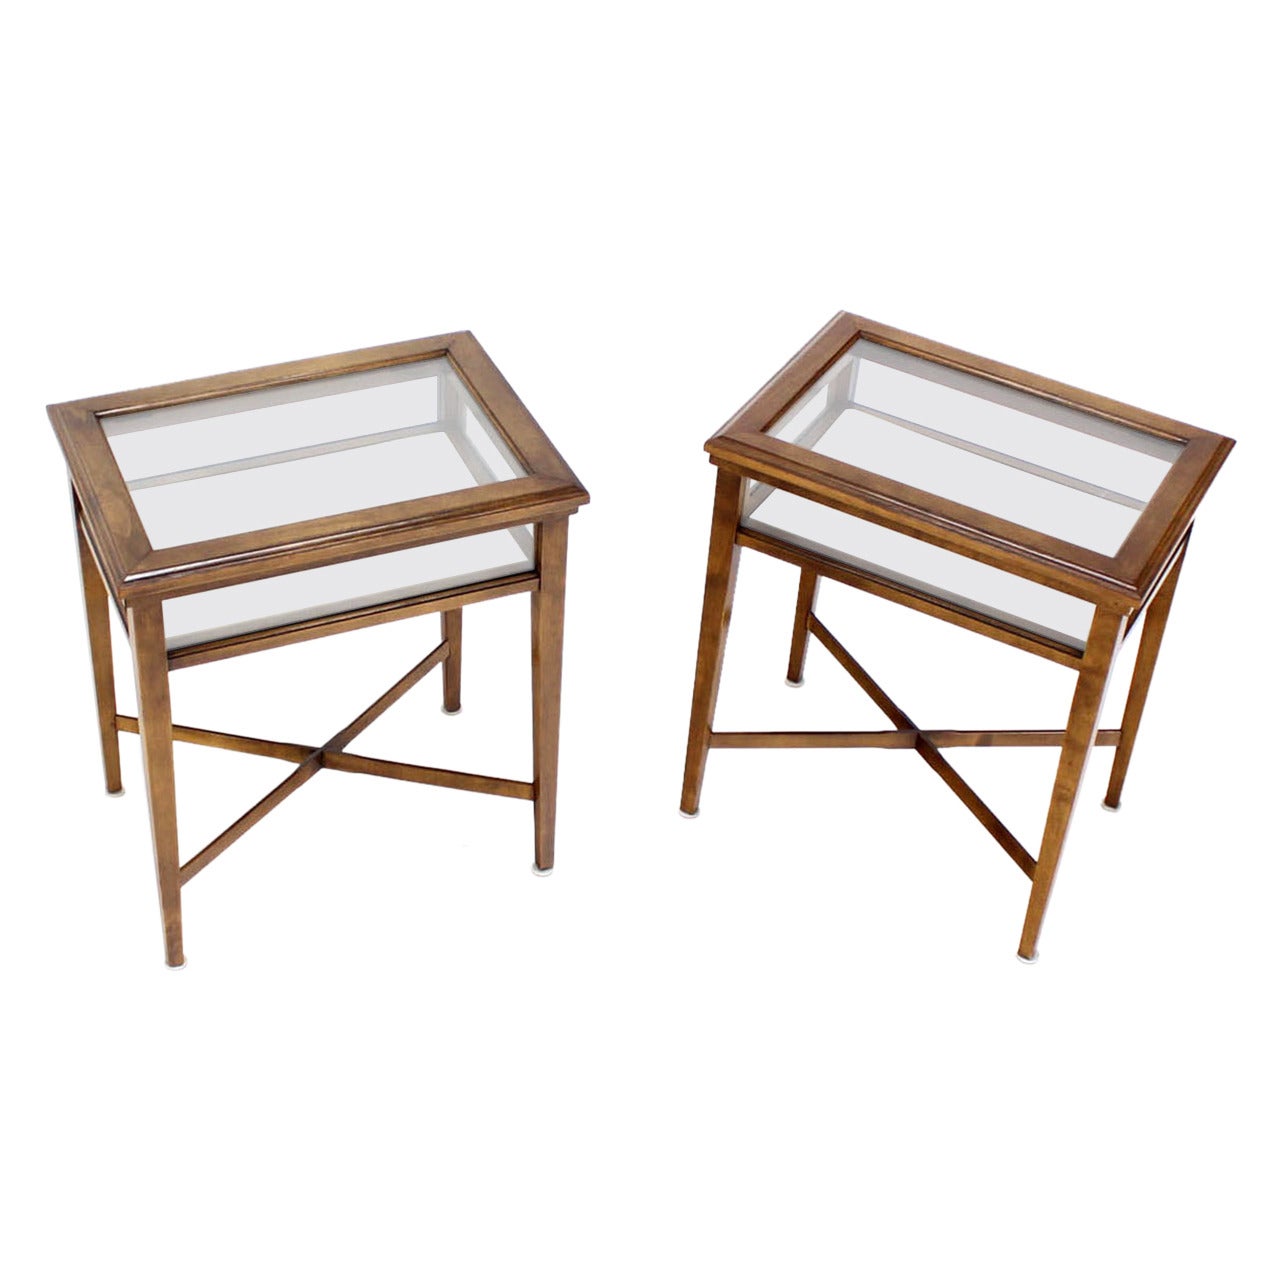 Pair of Glass and Wood Lift-Top Cross Base End Tables